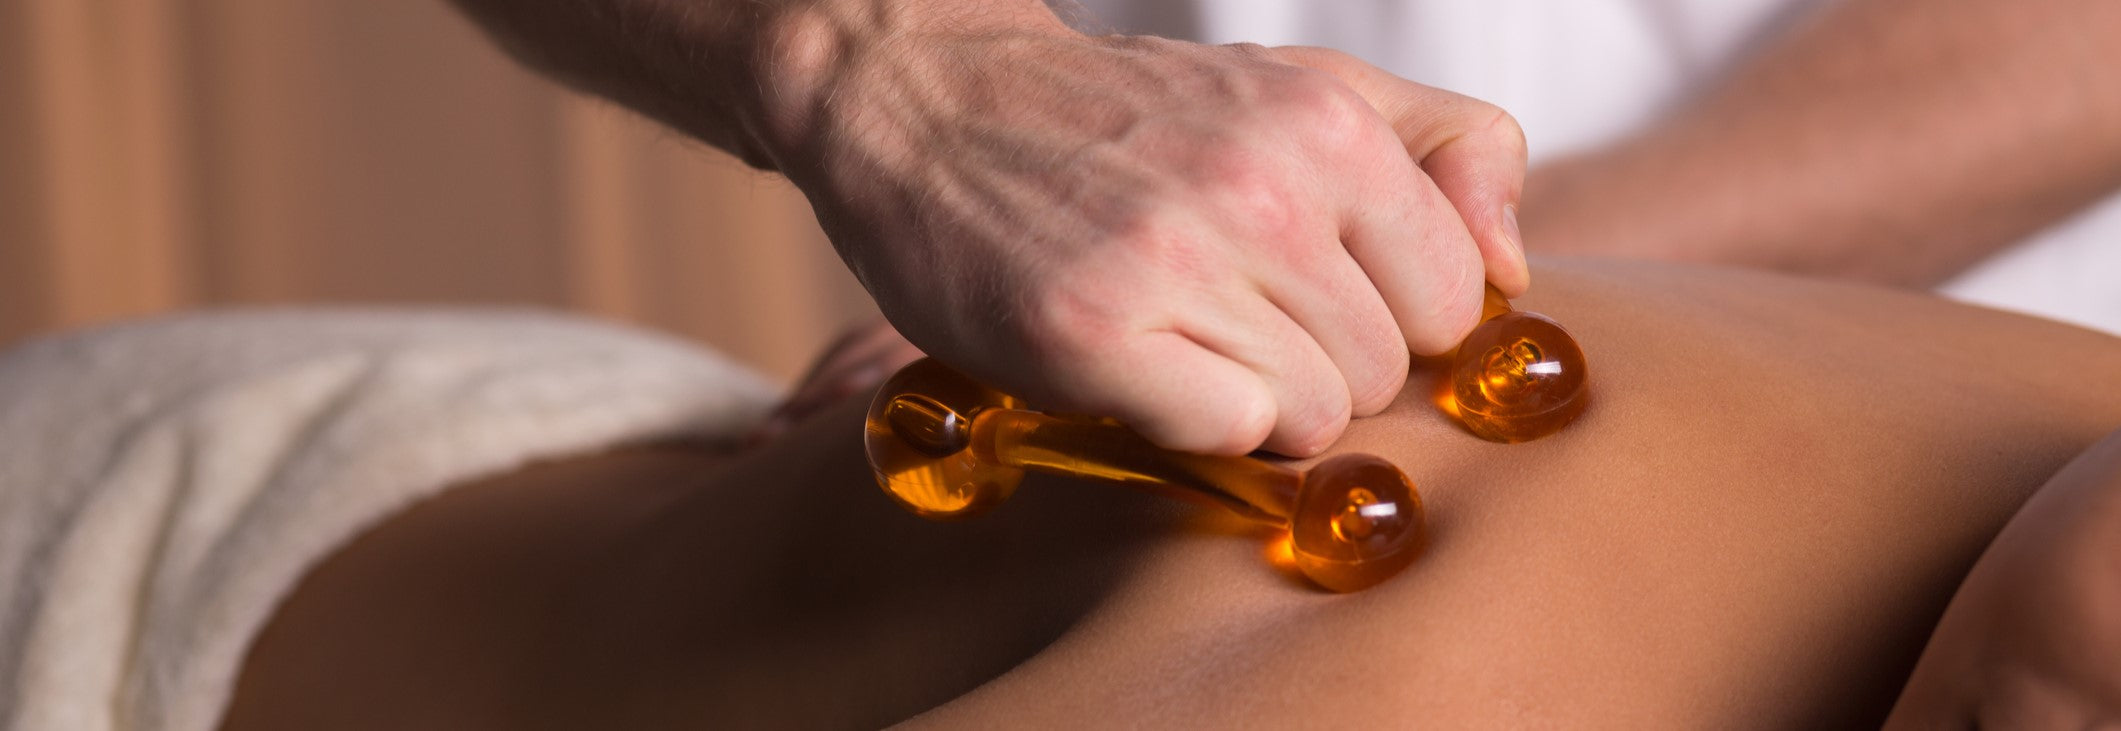 A woman receiving soft tissue treatment on her back using a back massager